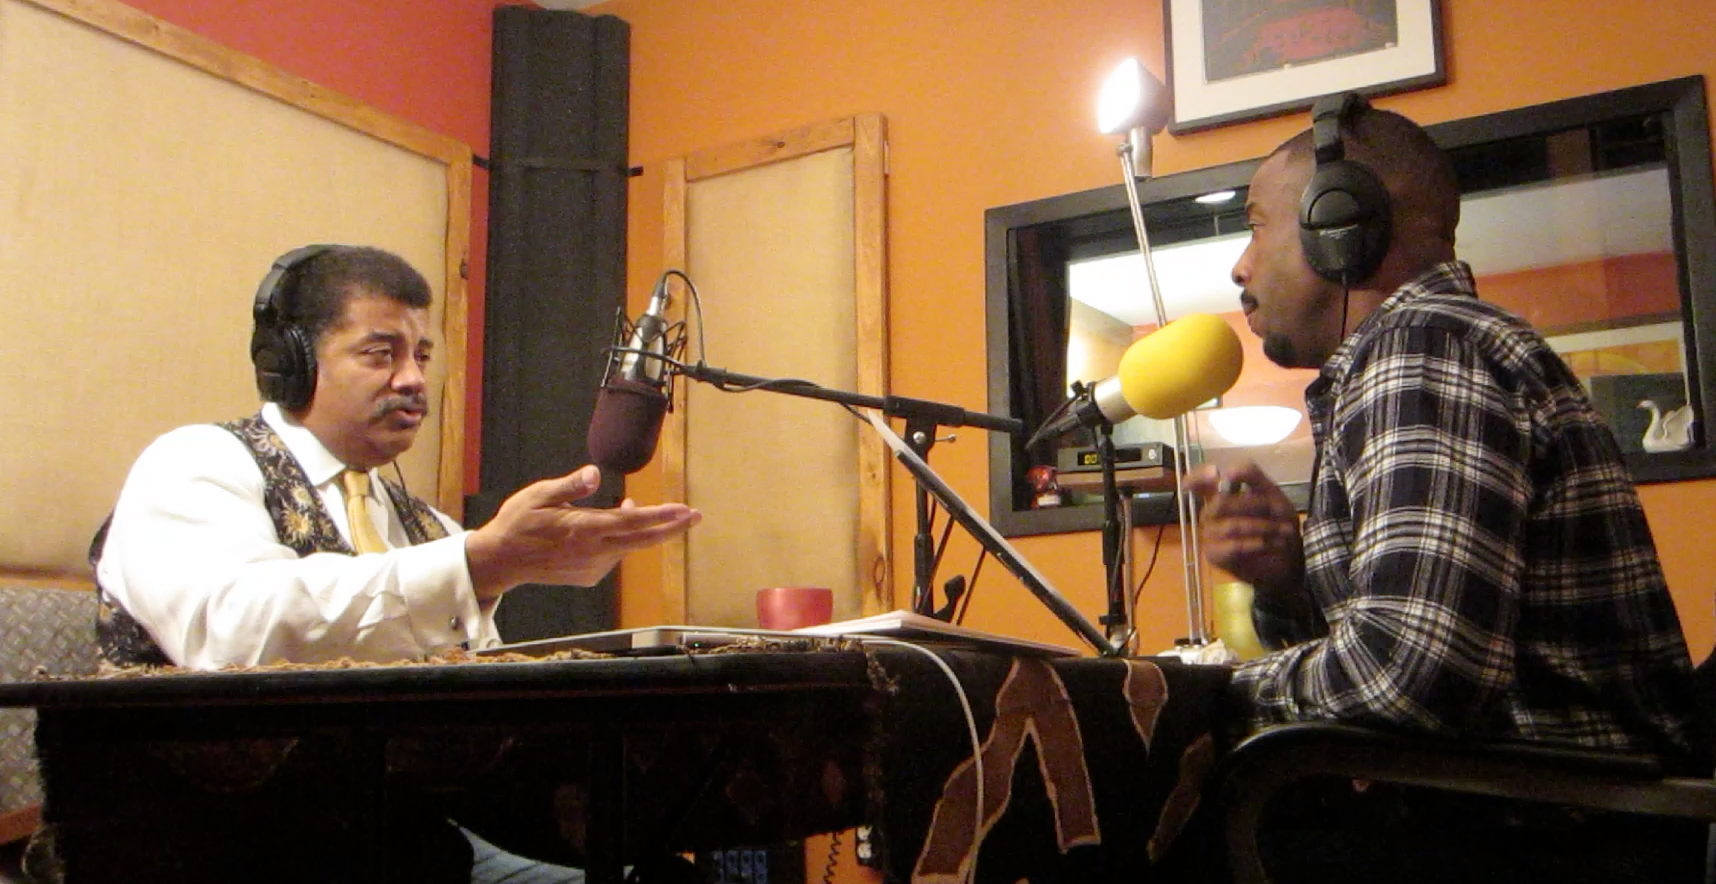 Neil deGrasse Tyson and comedian Chuck Nice in the studio